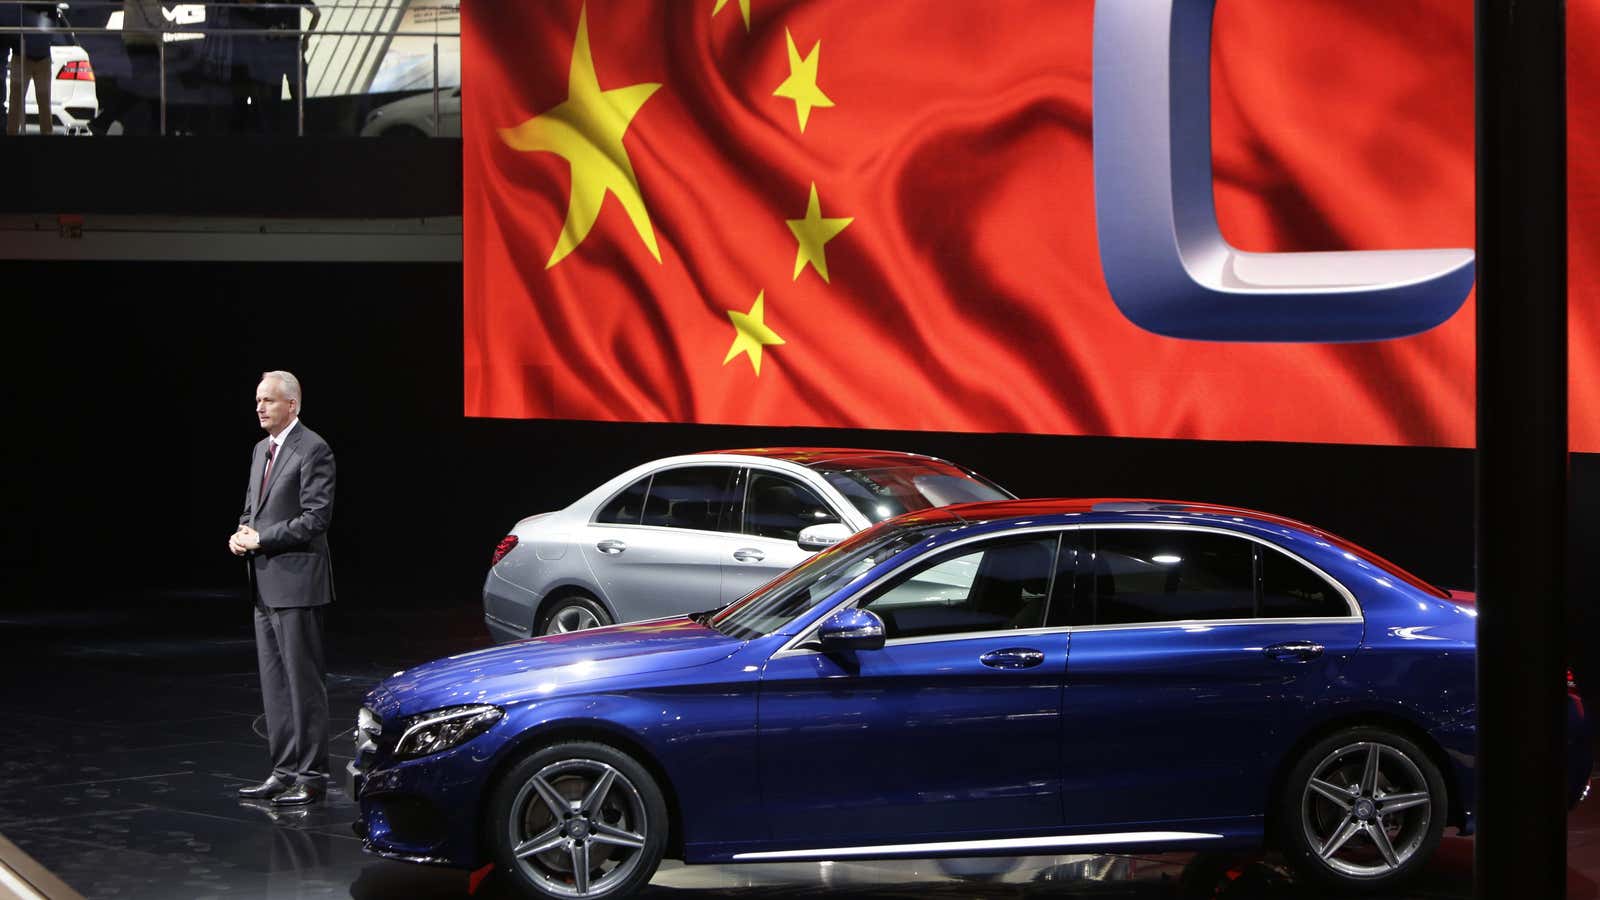 After the Eurozone debt crisis, Chinese companies invested heavily in Europe’s manufacturing sector. Today, China says its companies can compete against their European rivals.